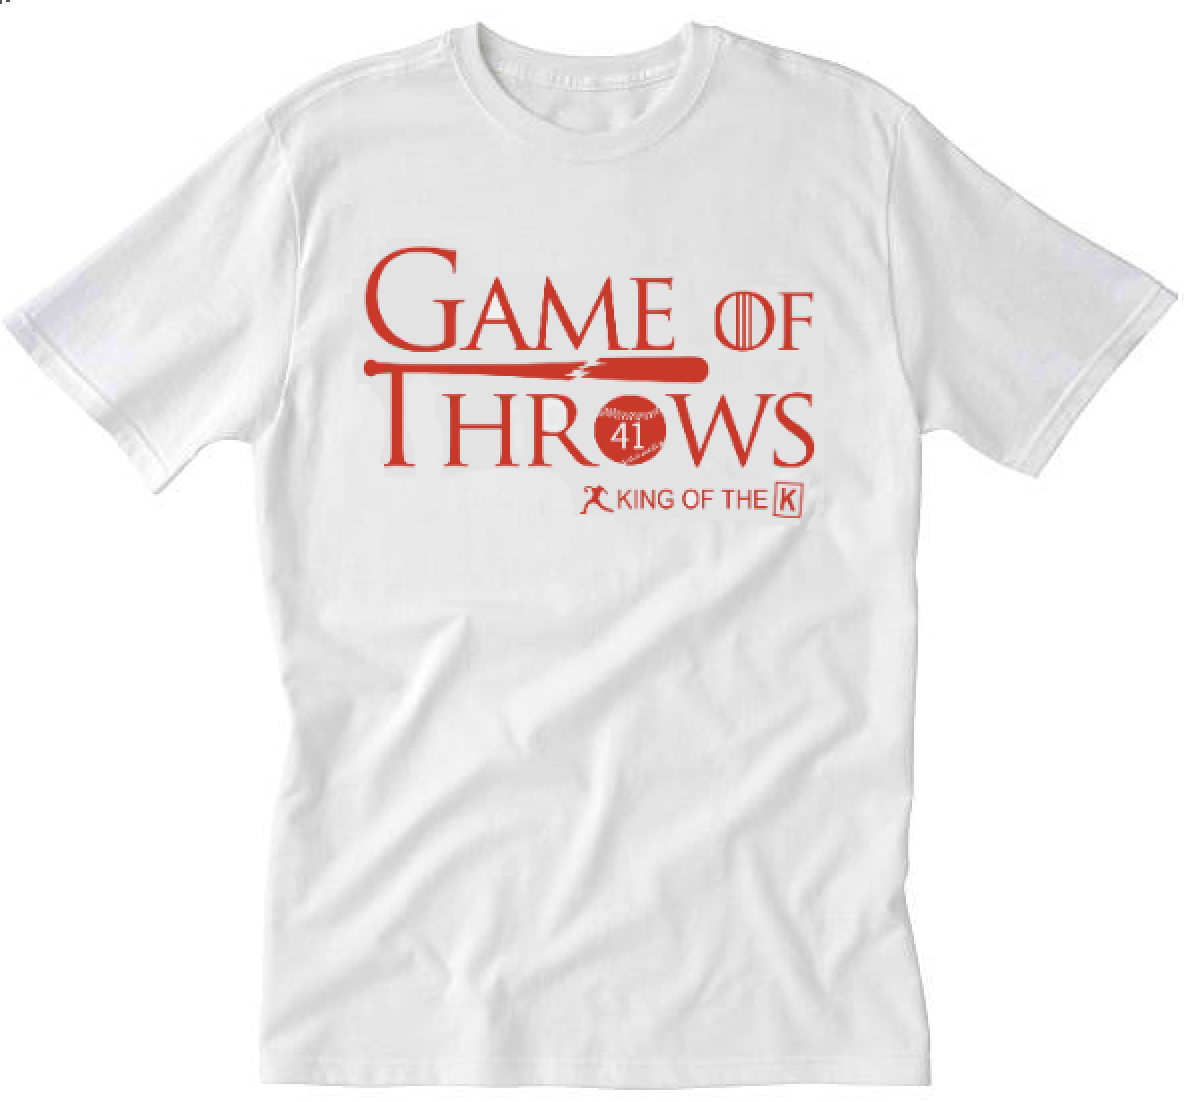 red sox game shirts